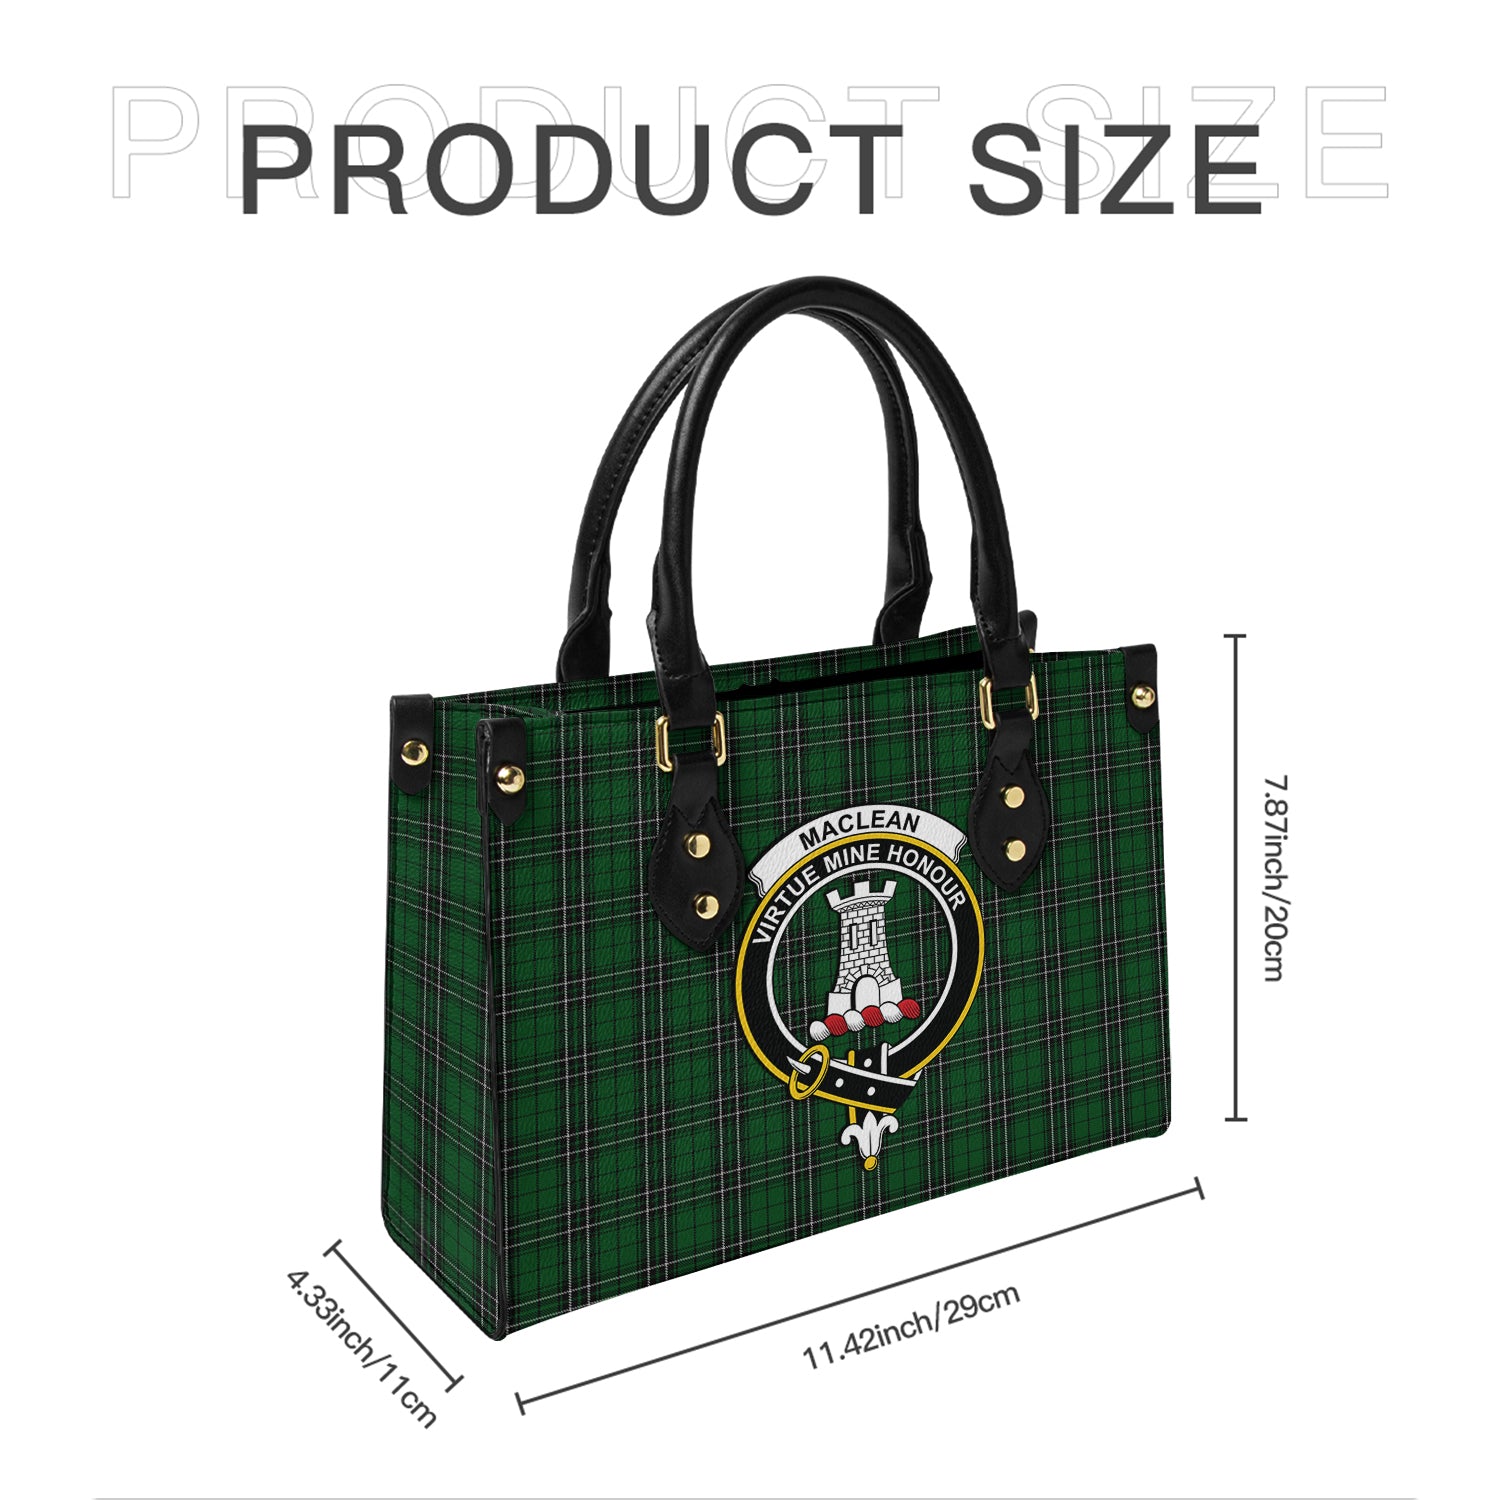 maclean-of-duart-hunting-tartan-leather-bag-with-family-crest